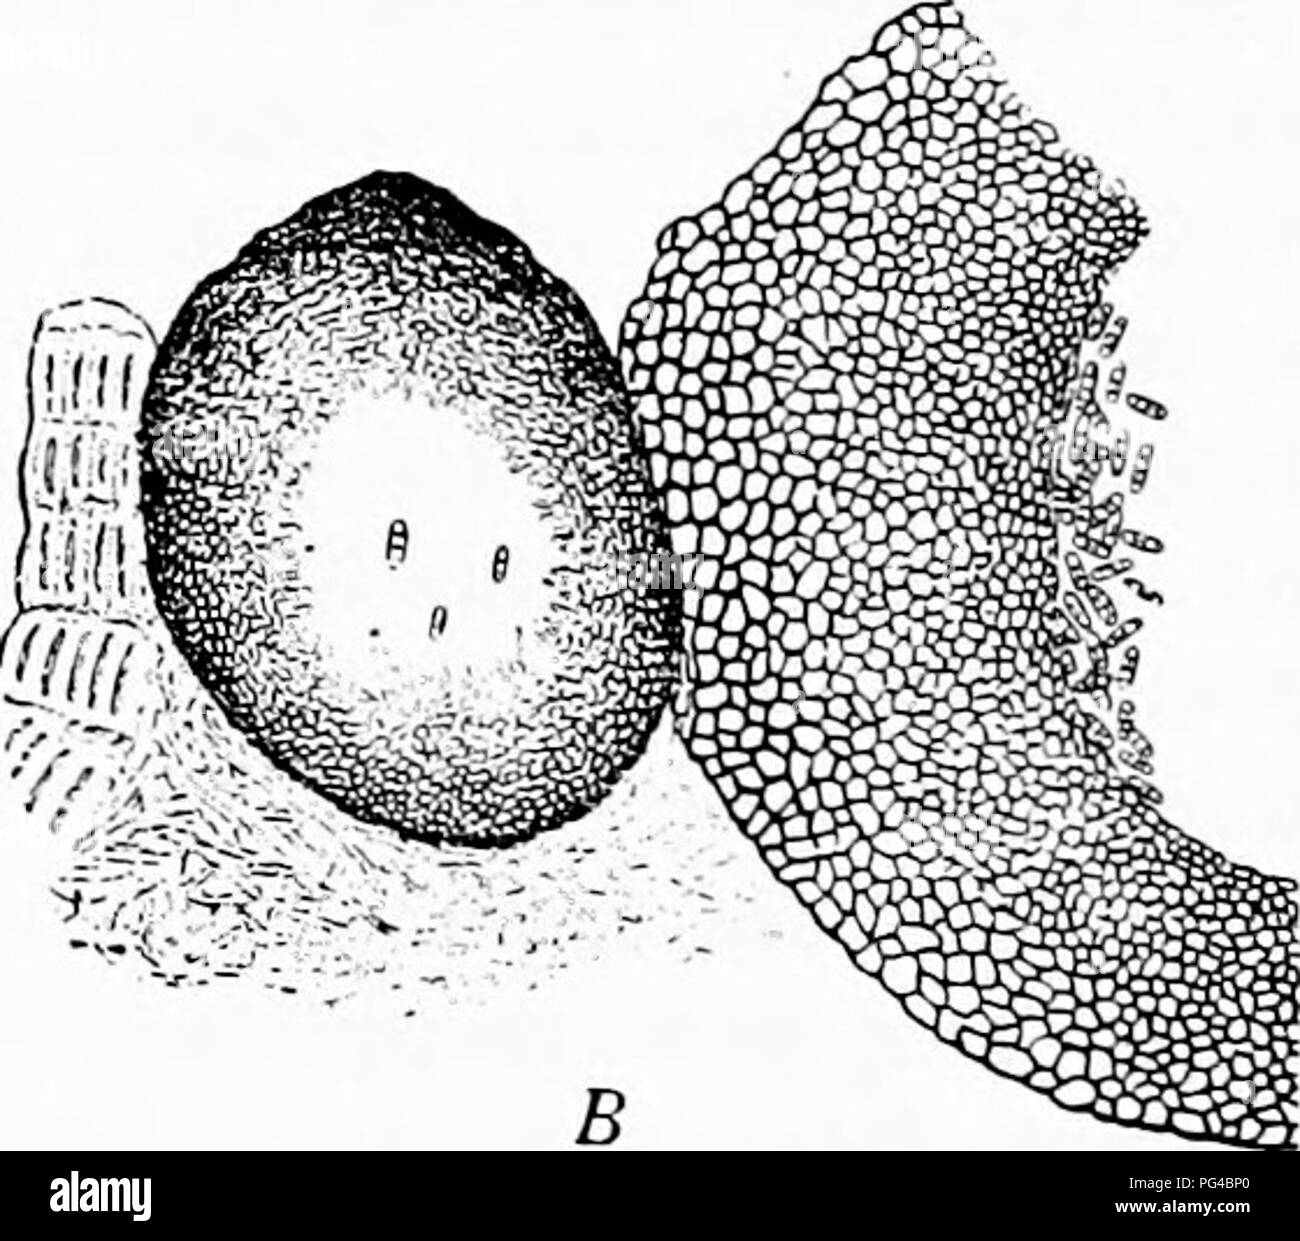 . Diseases of plants induced by cryptogamic parasites : introduction to the study of pathogenic Fungi, slime-Fungi, bacteria, &amp; Algae . Plant diseases; Parasitic plants; Fungi. Fig. 99.—Cucurbitaria Idburni. A, Stroma with pycnidia containing minute unicellular conidia. B, One of the large smooth pycnidia. (After v. Tubeuf.) The mature perithecia have a peridium consisting of a loose pseudoparenchyma with a rough warty exterior and a pore set in a distinct depression (Fig. 100.) The paraphyses are long, strong threads, often branched, and between them arise the long cylindrical asci with r Stock Photo